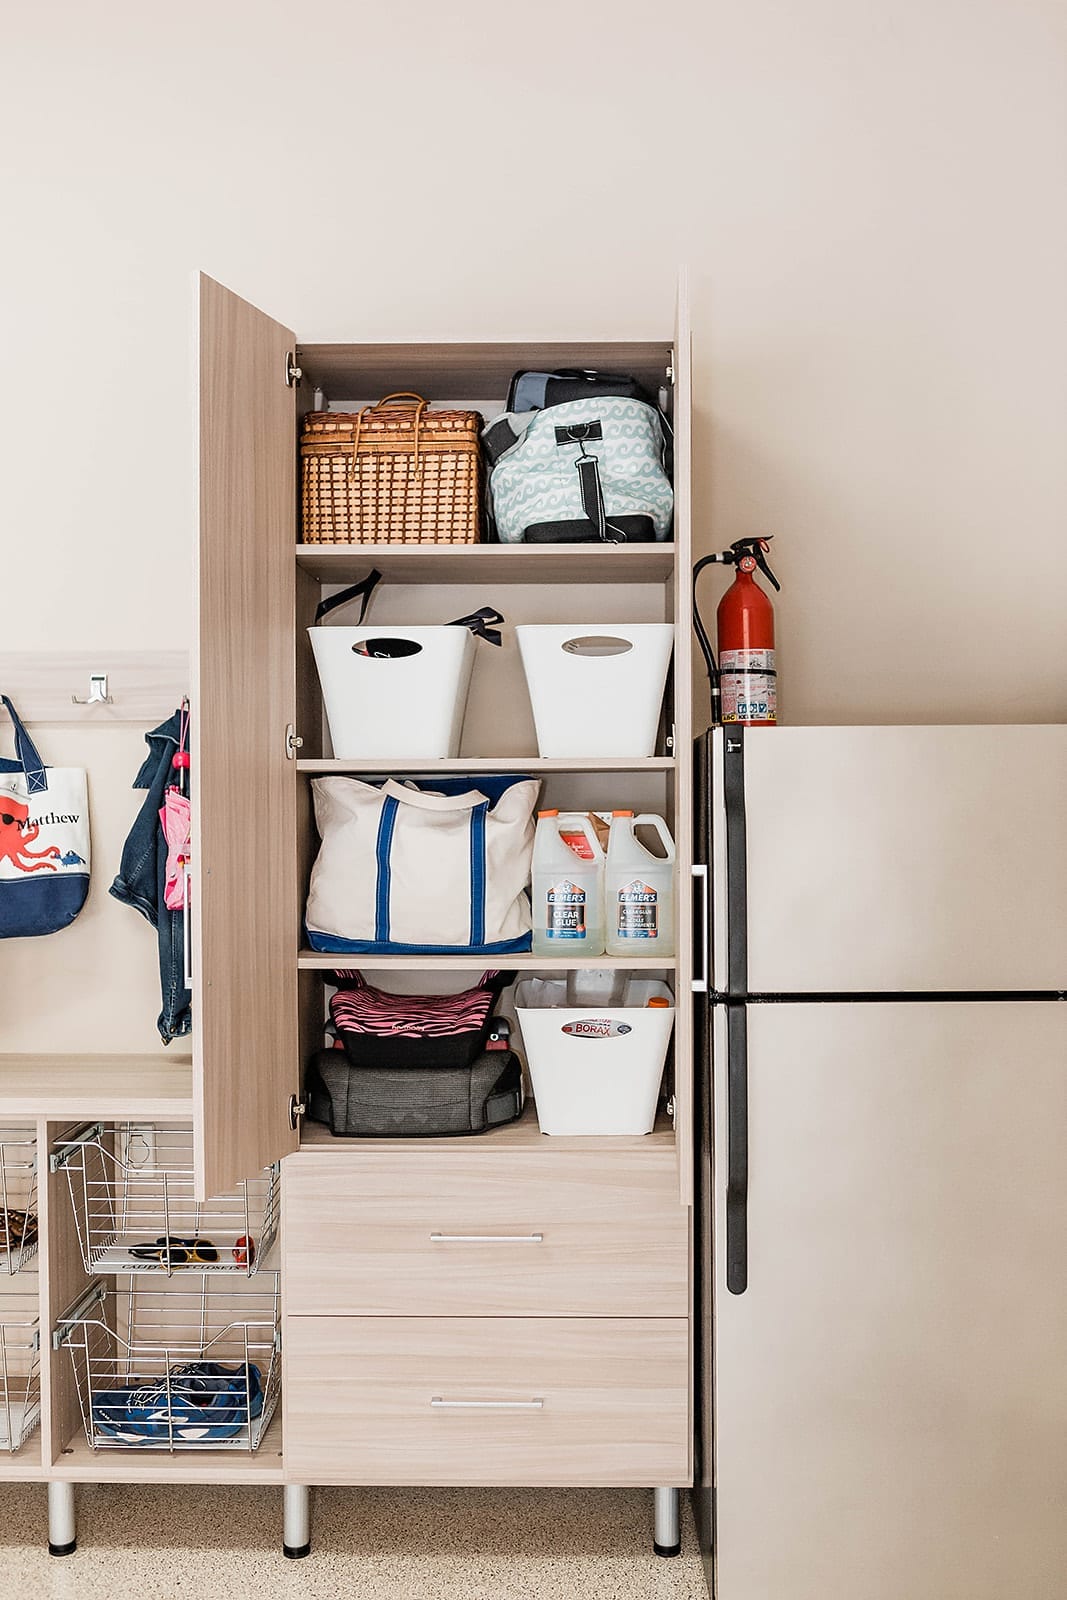 Storing Stuff in your Garage. What to store in your garage and where you should store it.